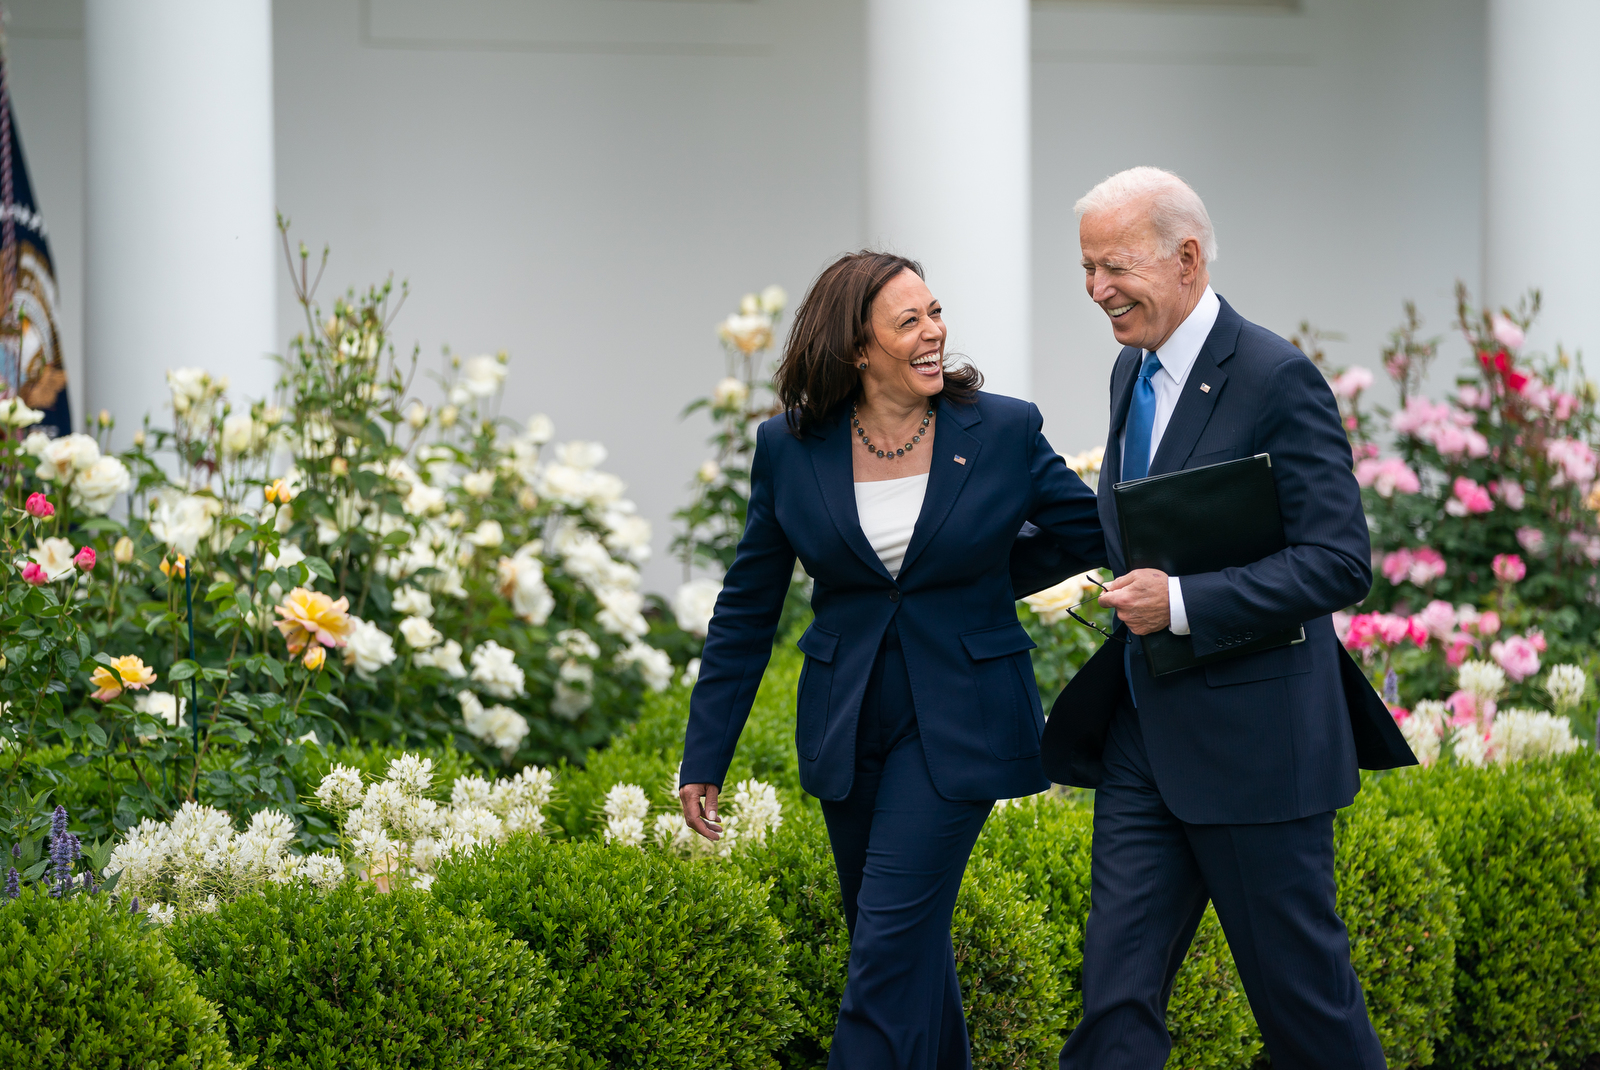 Kamala Harris to become Democratic presidential candidate following Biden’s withdrawal